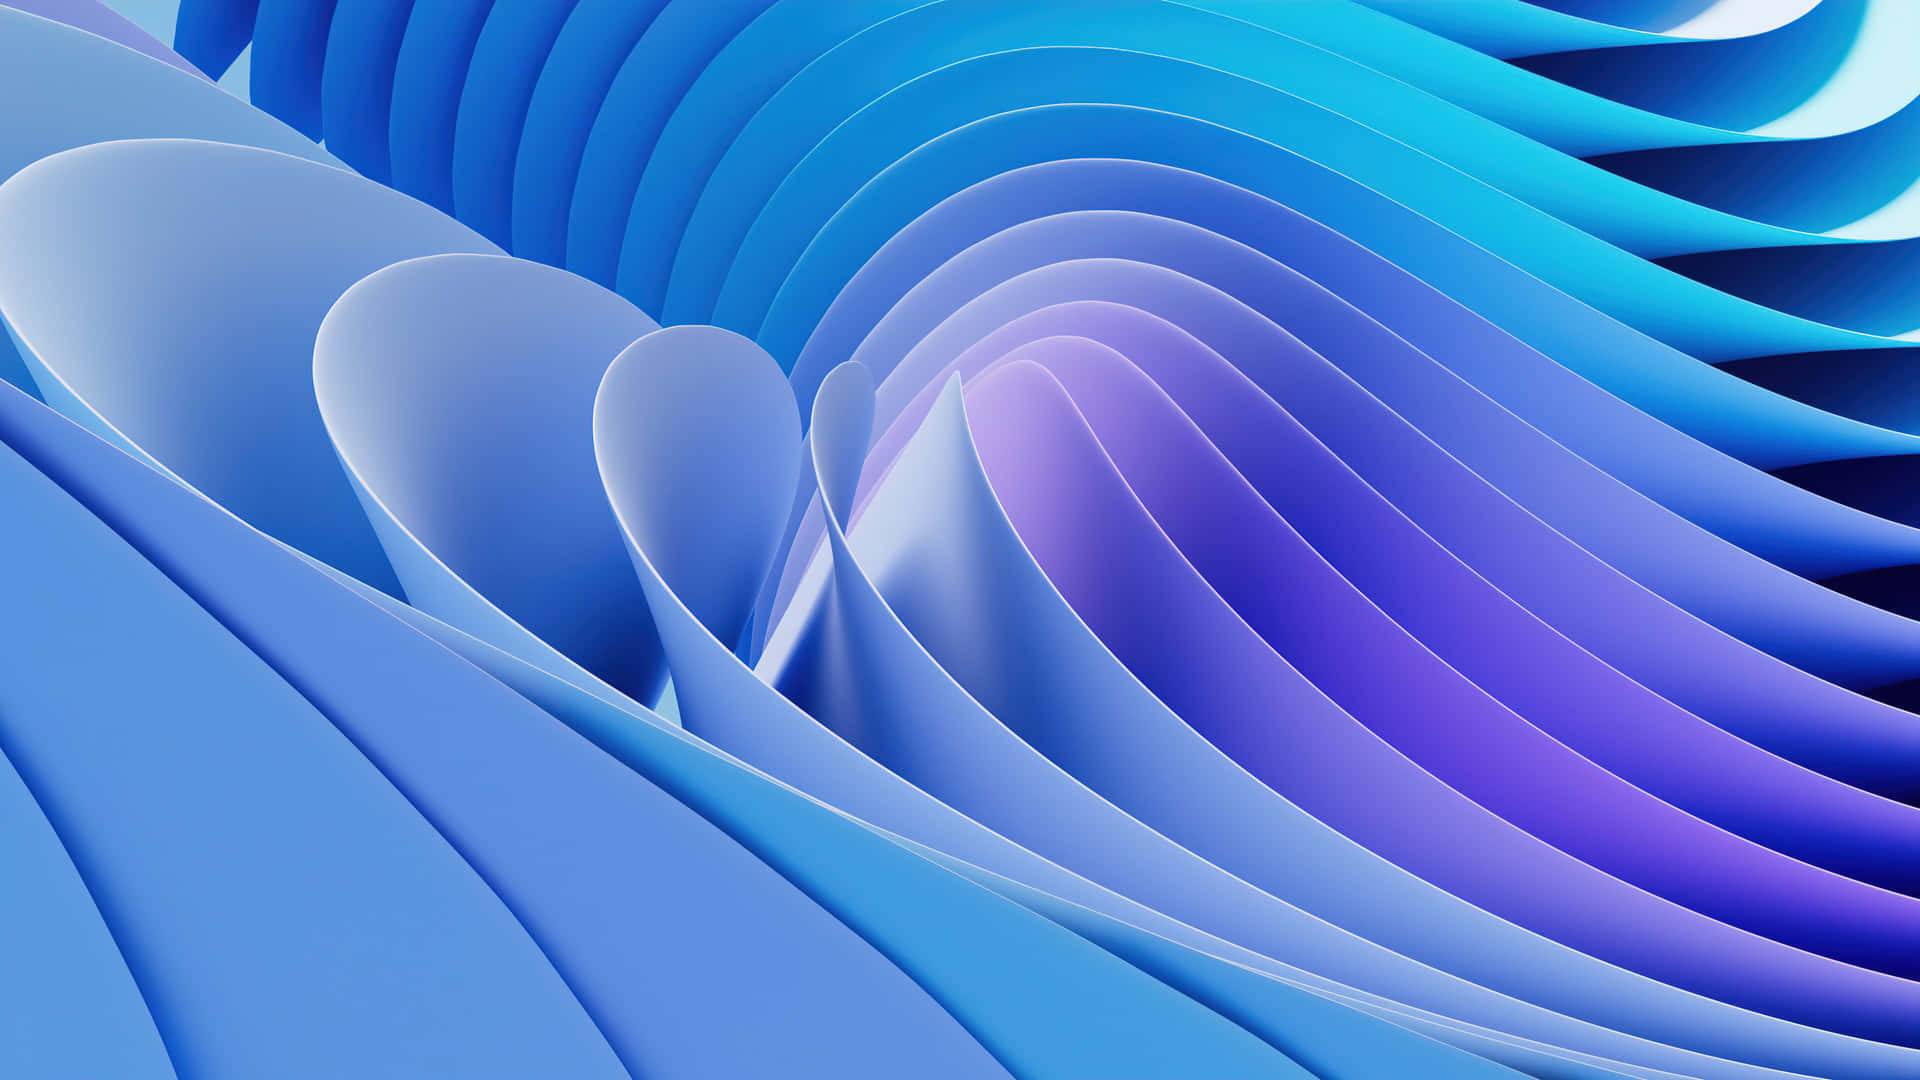 A Colorful Abstract Background